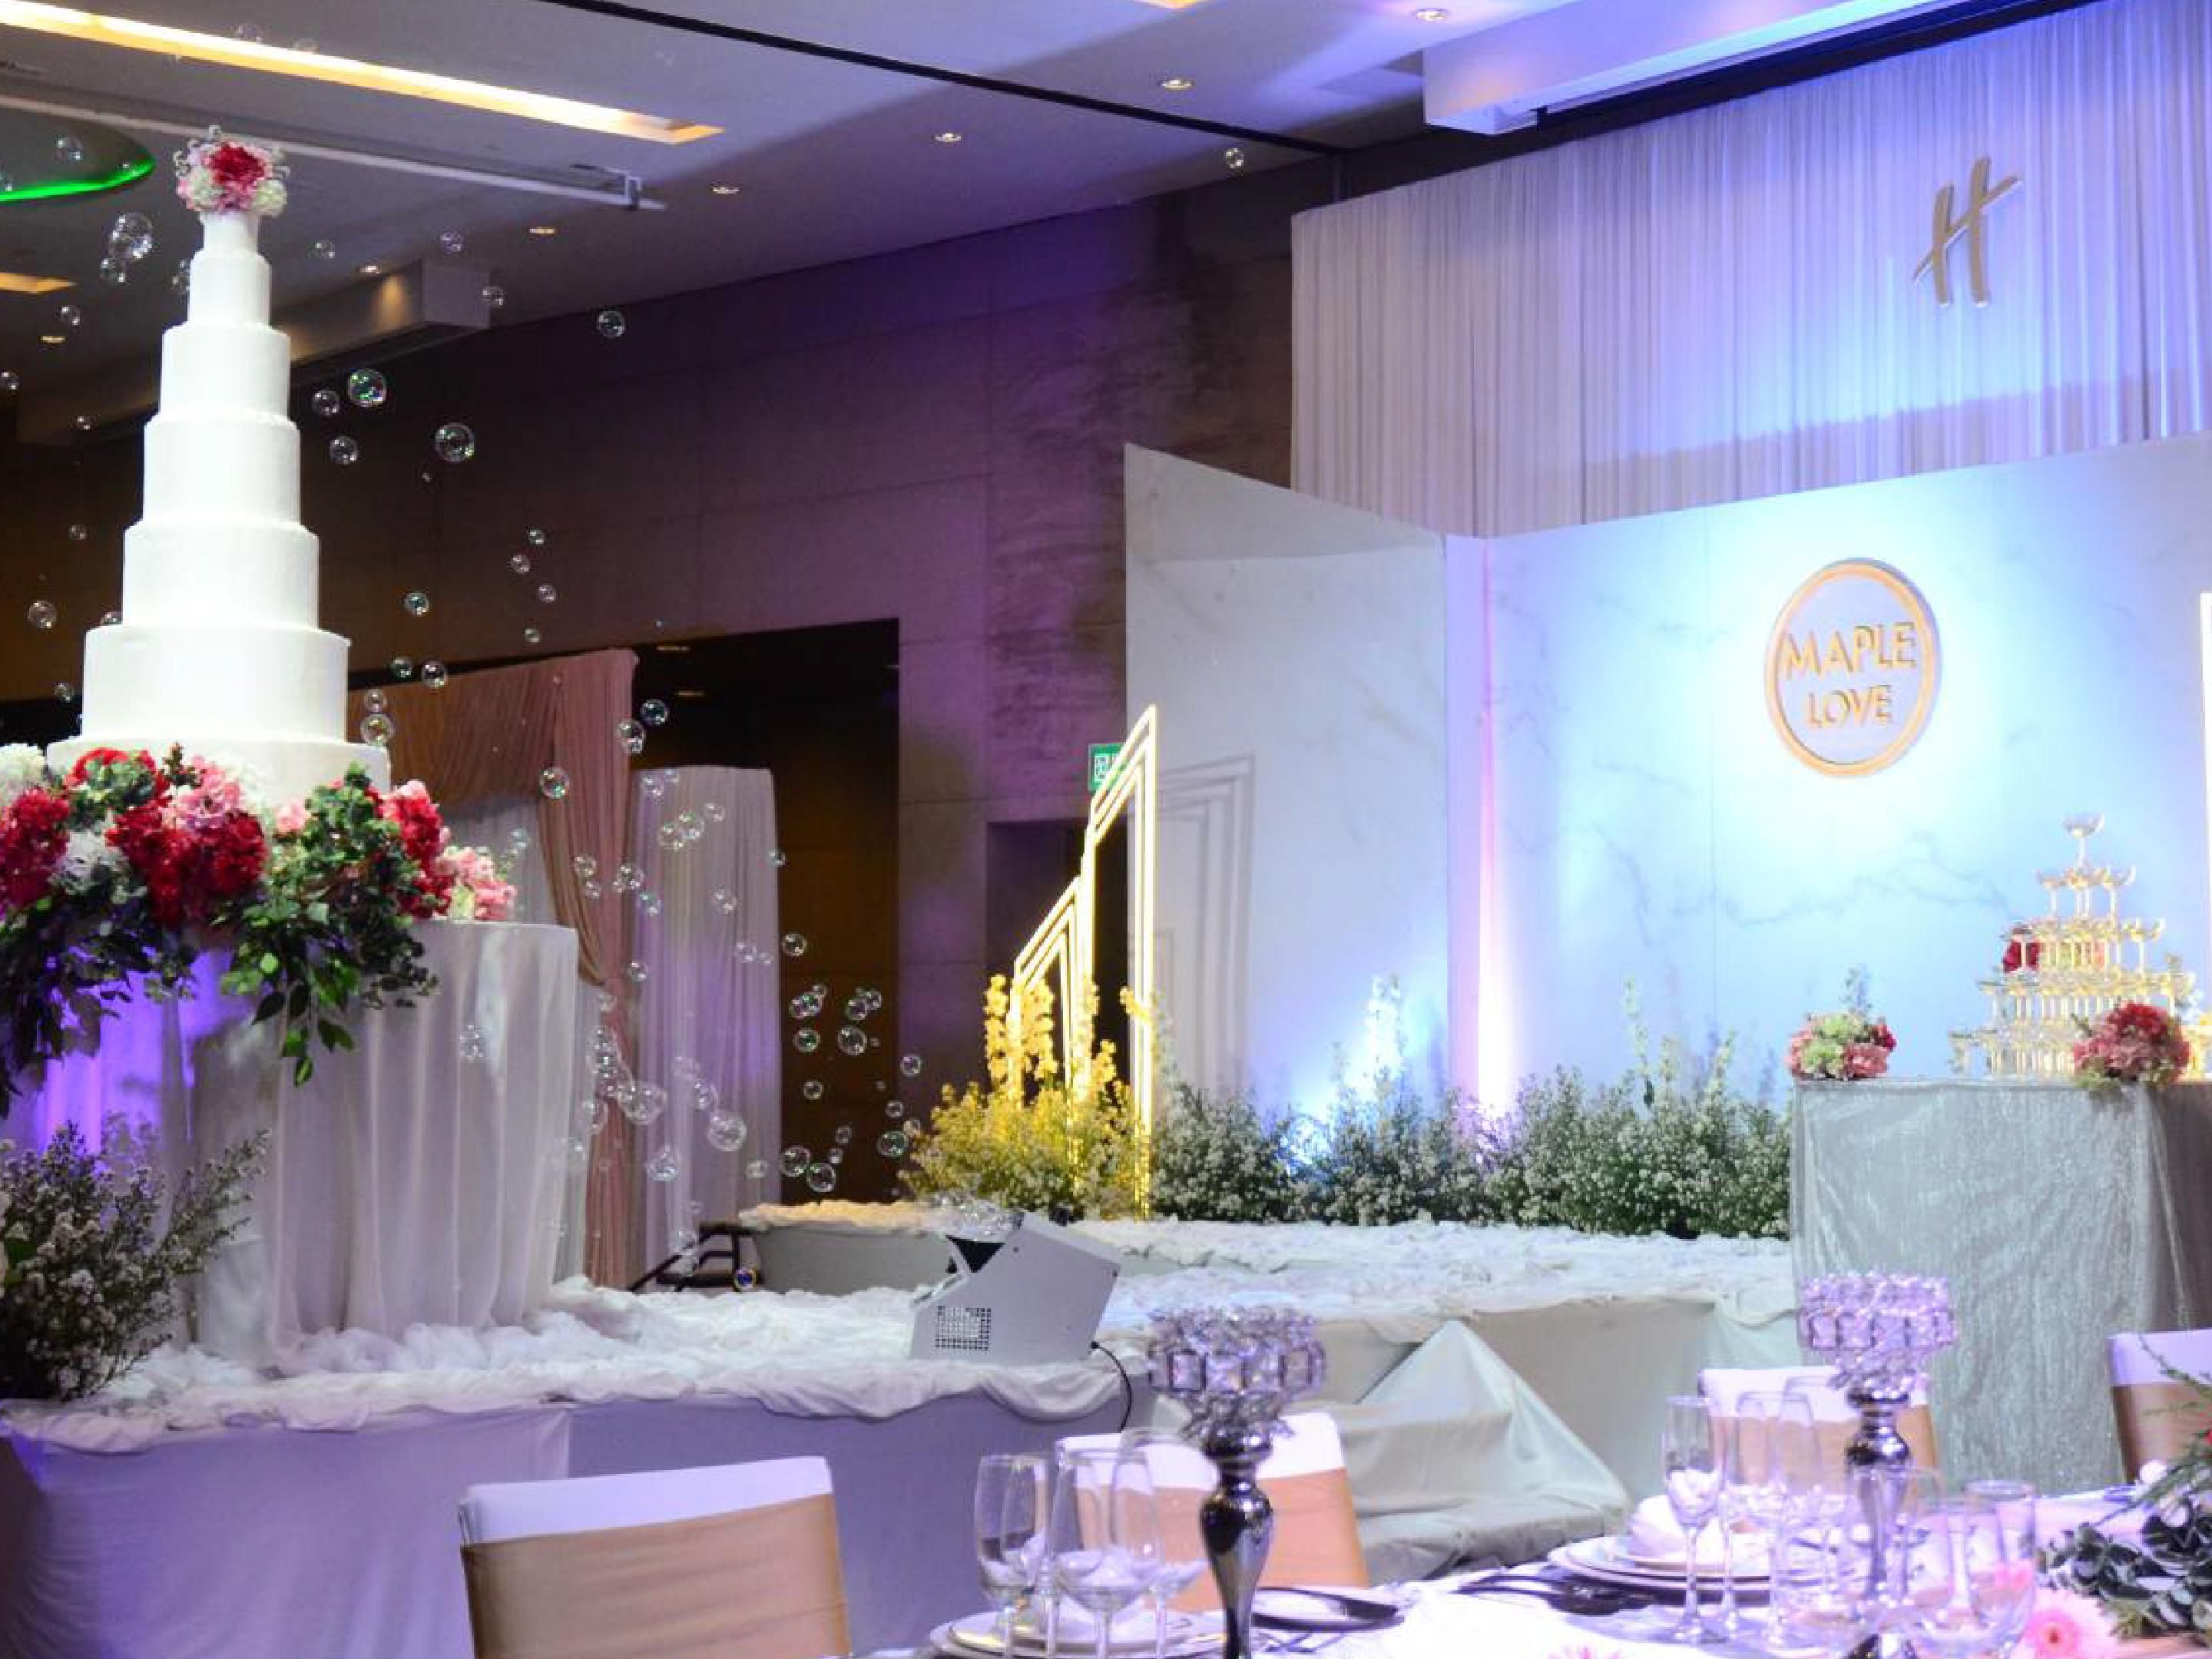 Start your auspicious day with significant elders blessing you with holy water and relish a grand wedding reception. In-house wedding specialist encourages all the attention to details which come from the heart with our Wedding Packages in Bangkok.